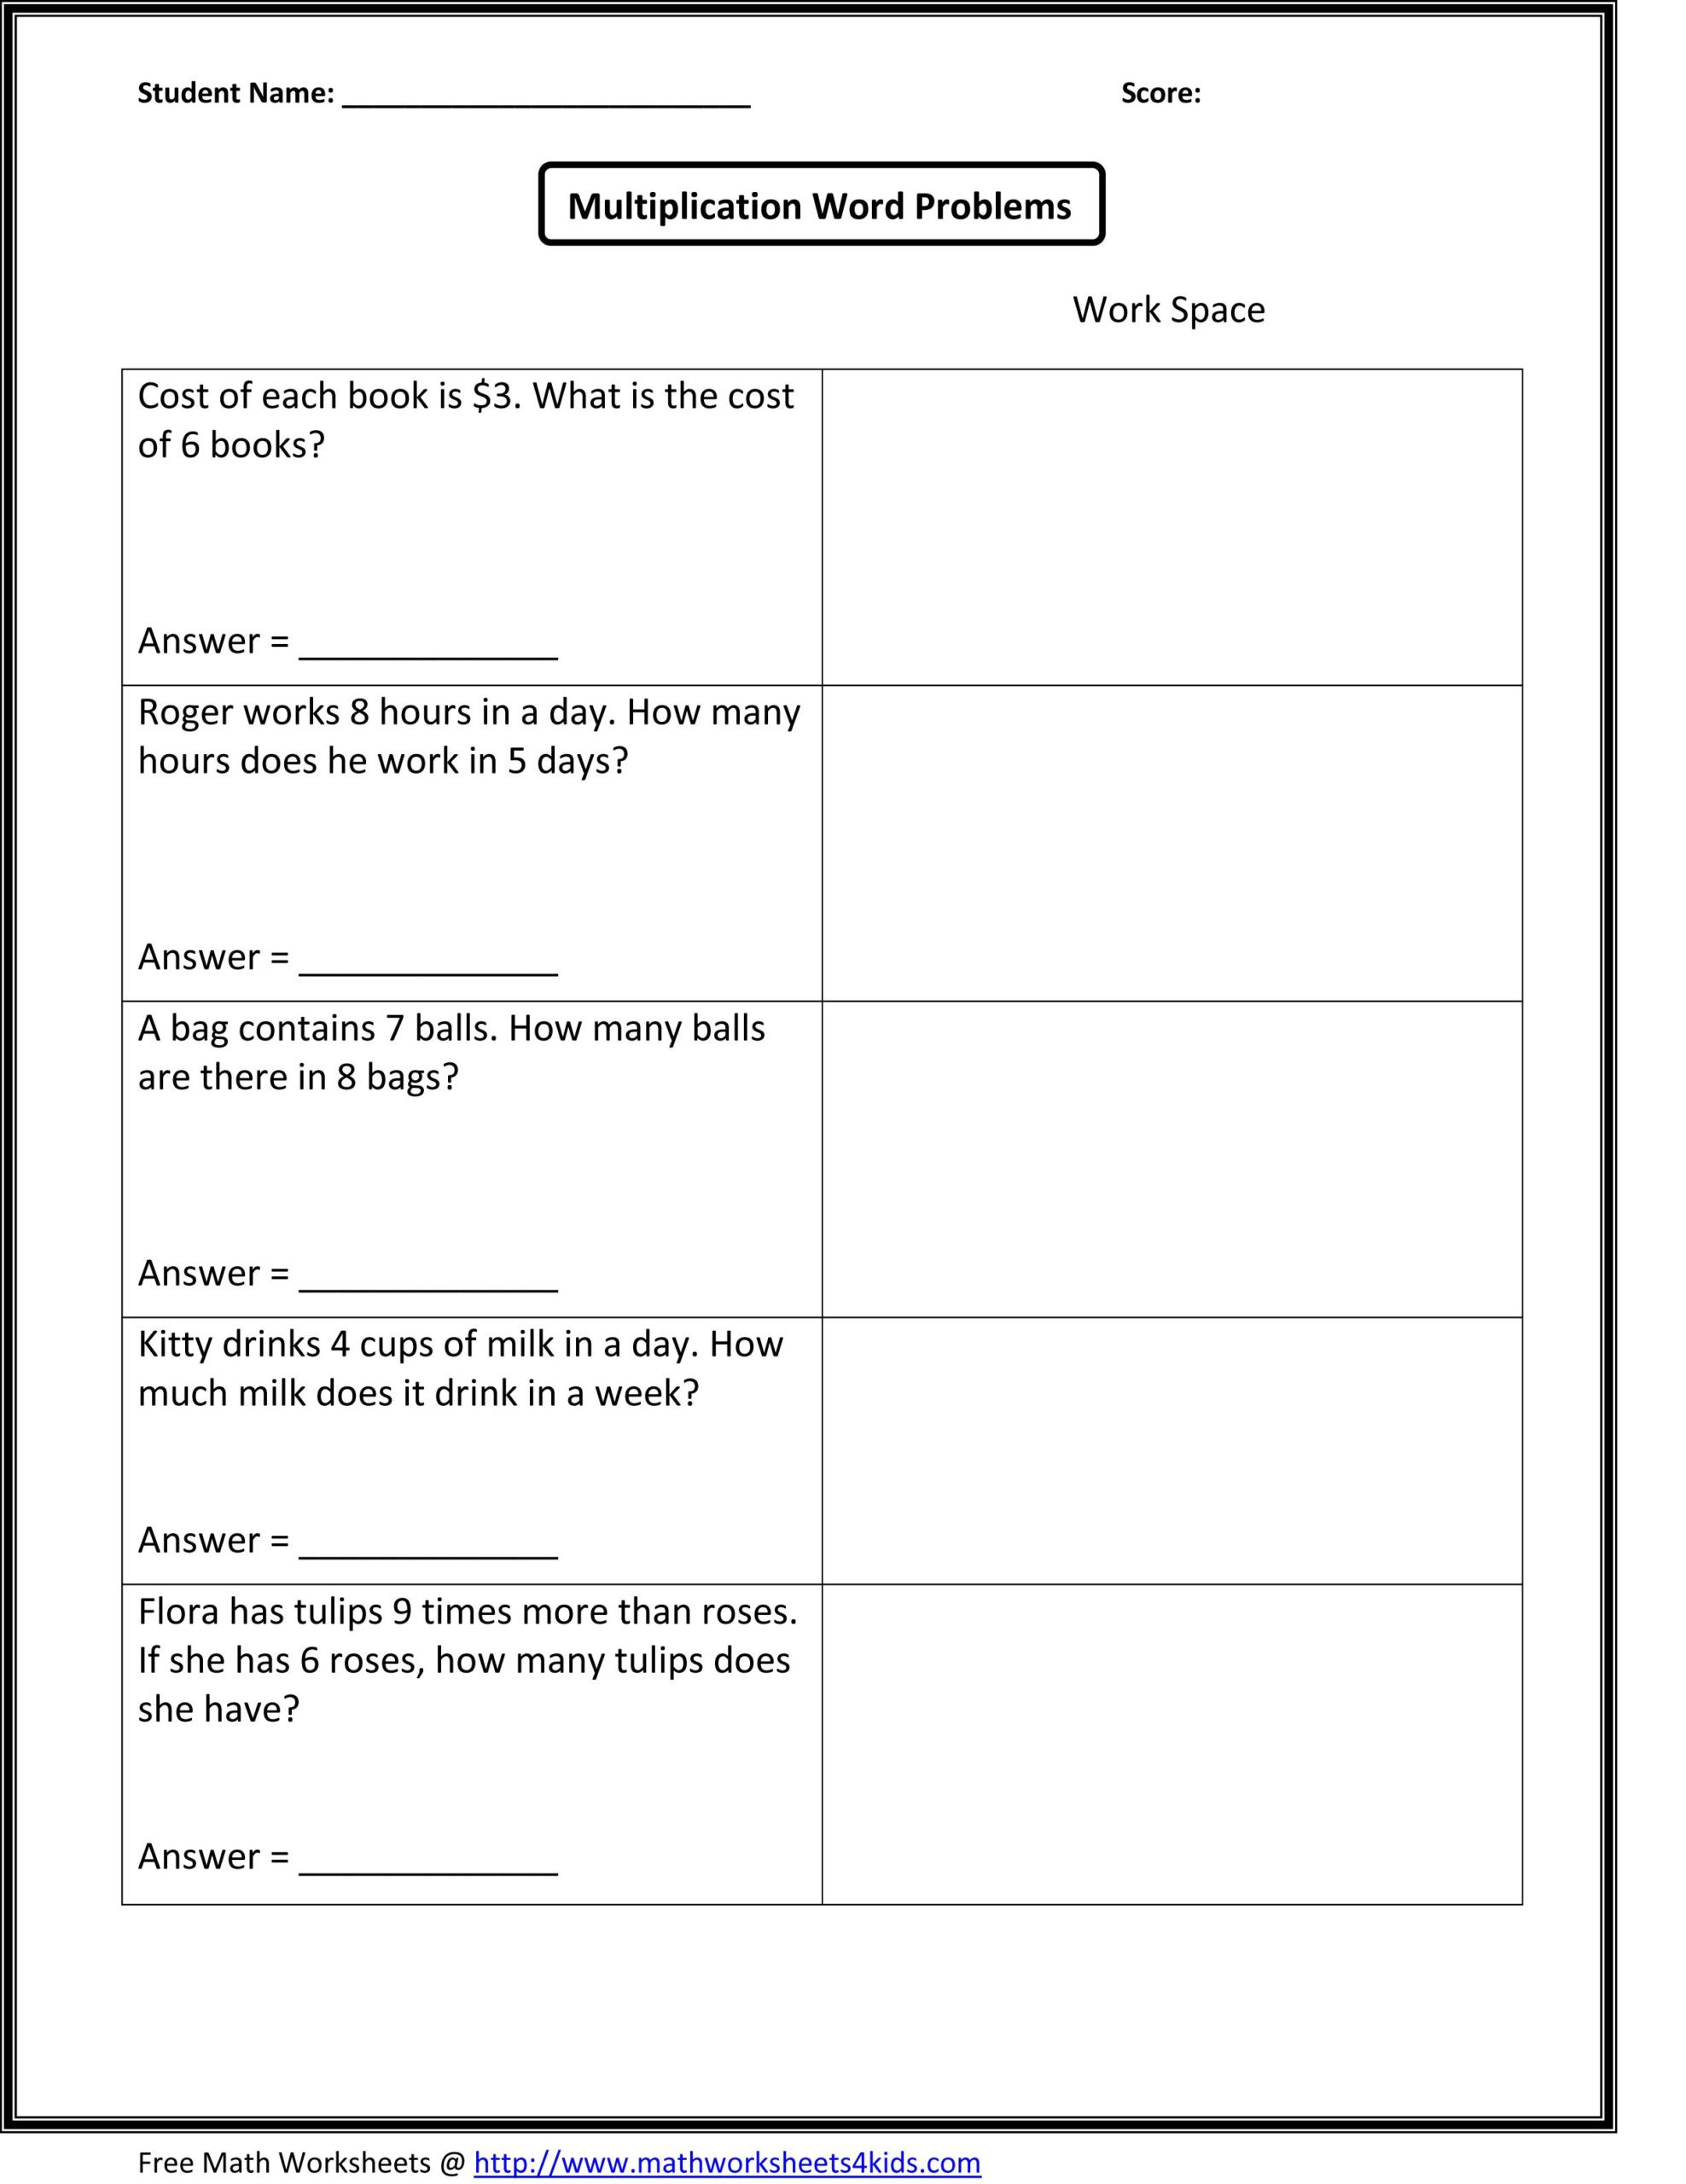 Dividing Fractions Word Problems Worksheet Math Worksheets by Grade and Subject Matter with 3rd